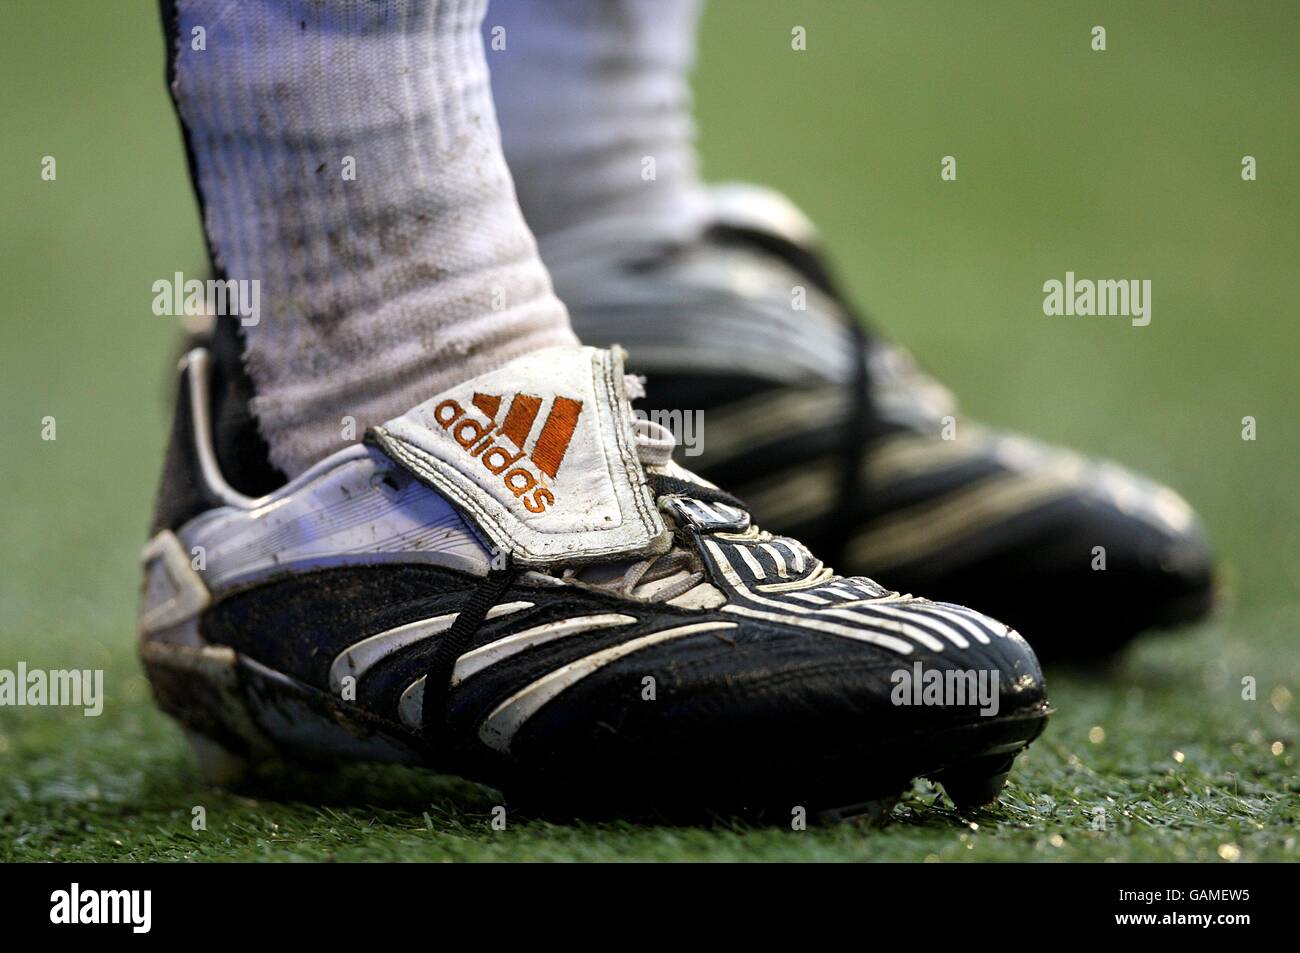 Soccer - Barclays Premier League - Fulham v Everton - Craven Cottage. A pair of Adidas football boots Stock Photo